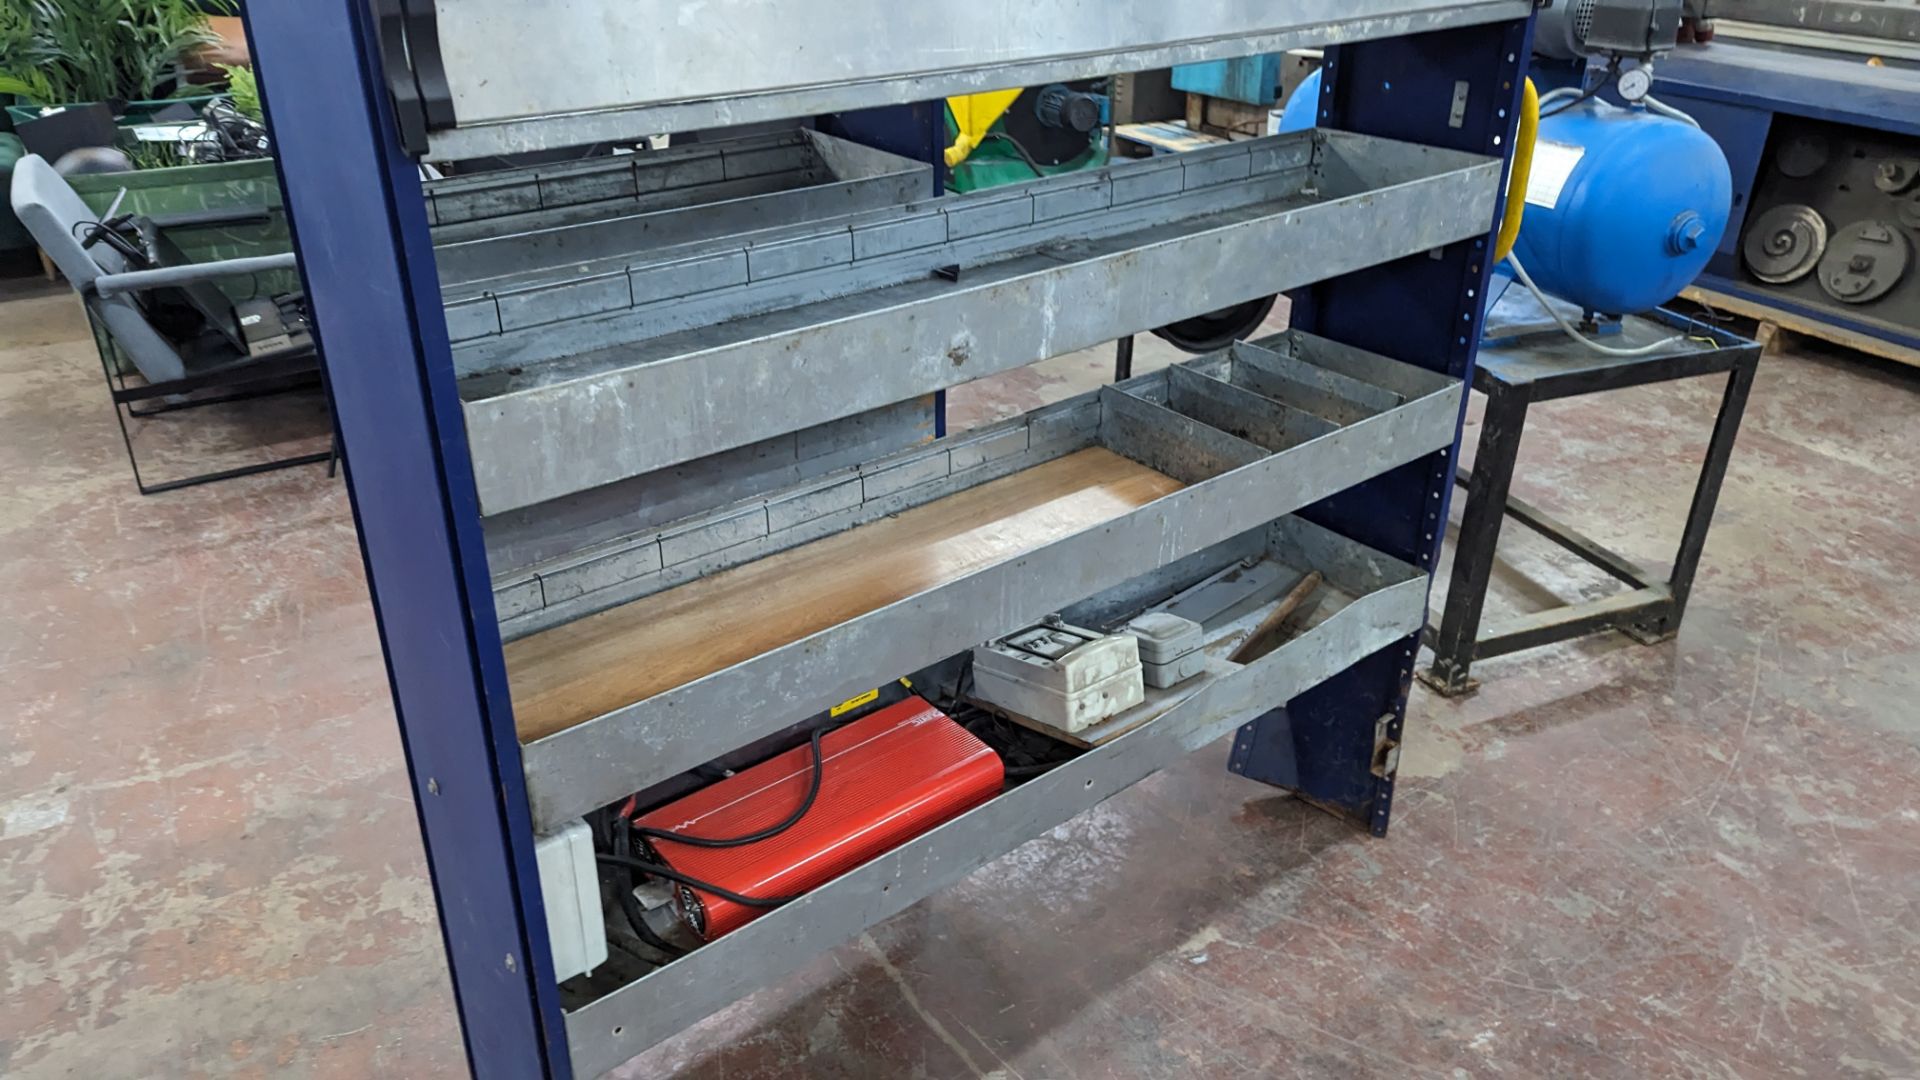 2 off Modula Racking van racks, each with a yellow handle at one end, understood to have been remove - Image 3 of 12